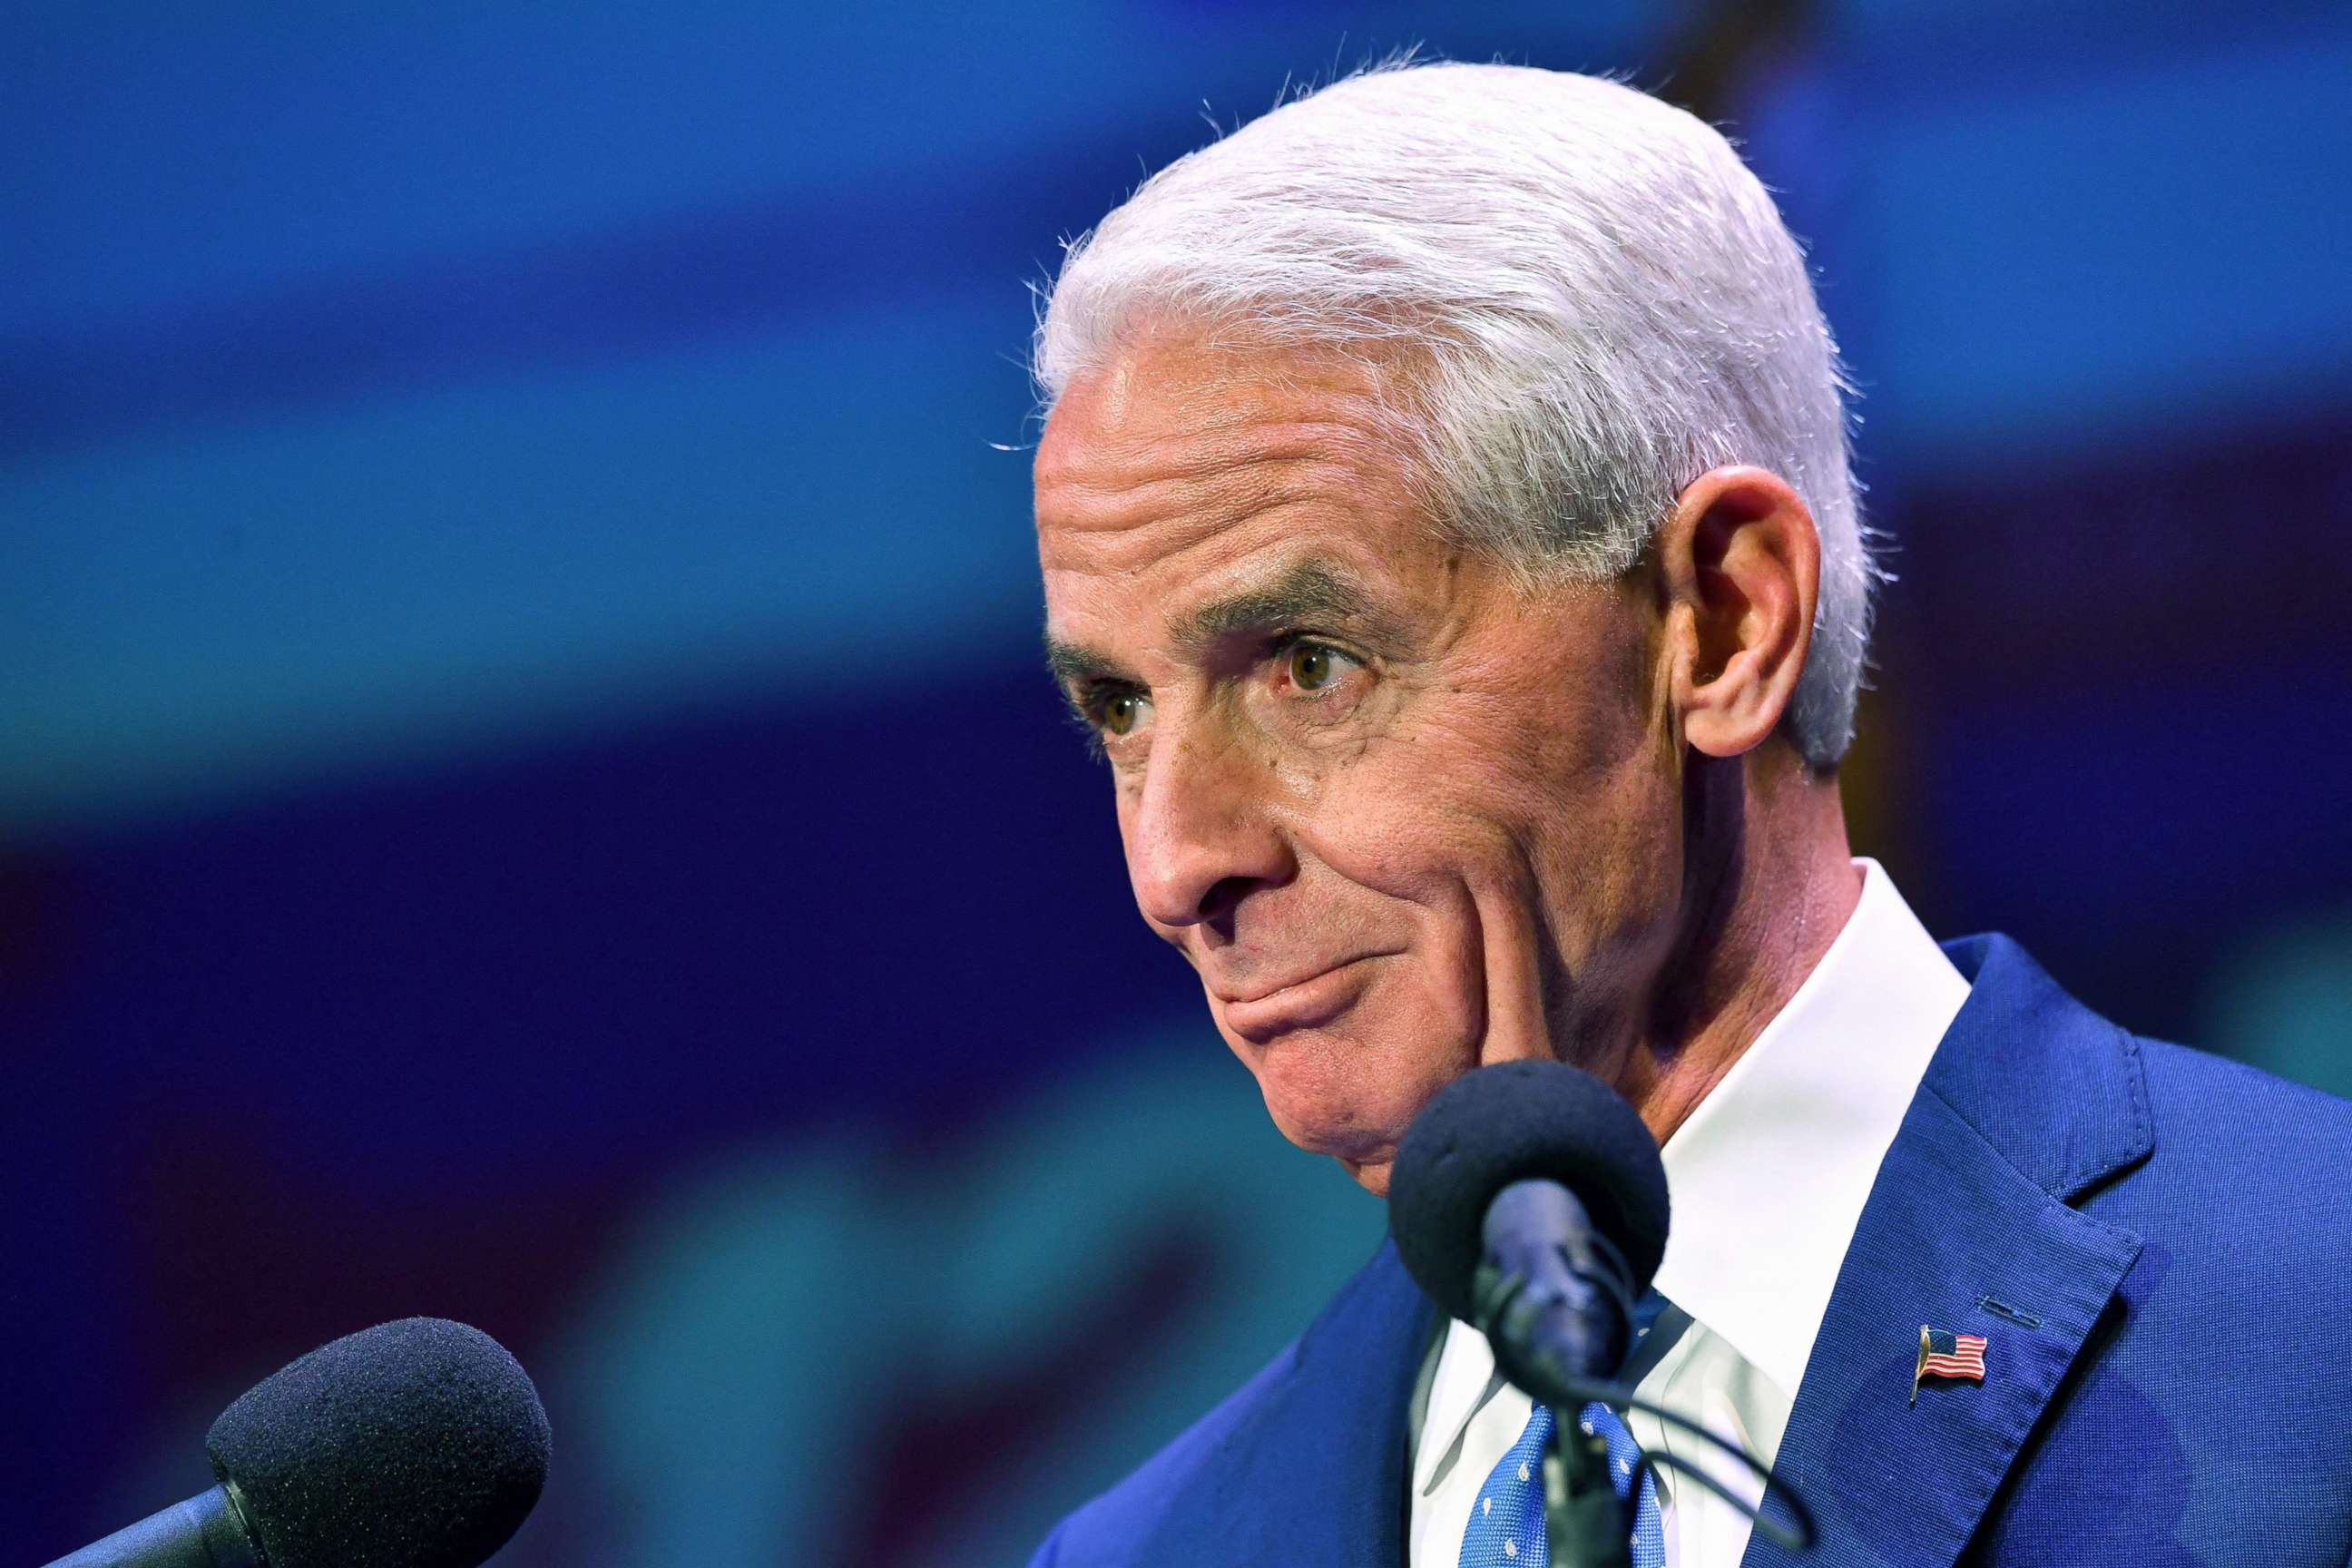 PHOTO: Democratic Party gubernatorial candidate Charlie Crist, a former governor, takes to the stage opposite Florida's Republican incumbent Gov. Ron DeSantis at the Sunrise Theatre in Fort Pierce, Fla., Oct. 24, 2022.